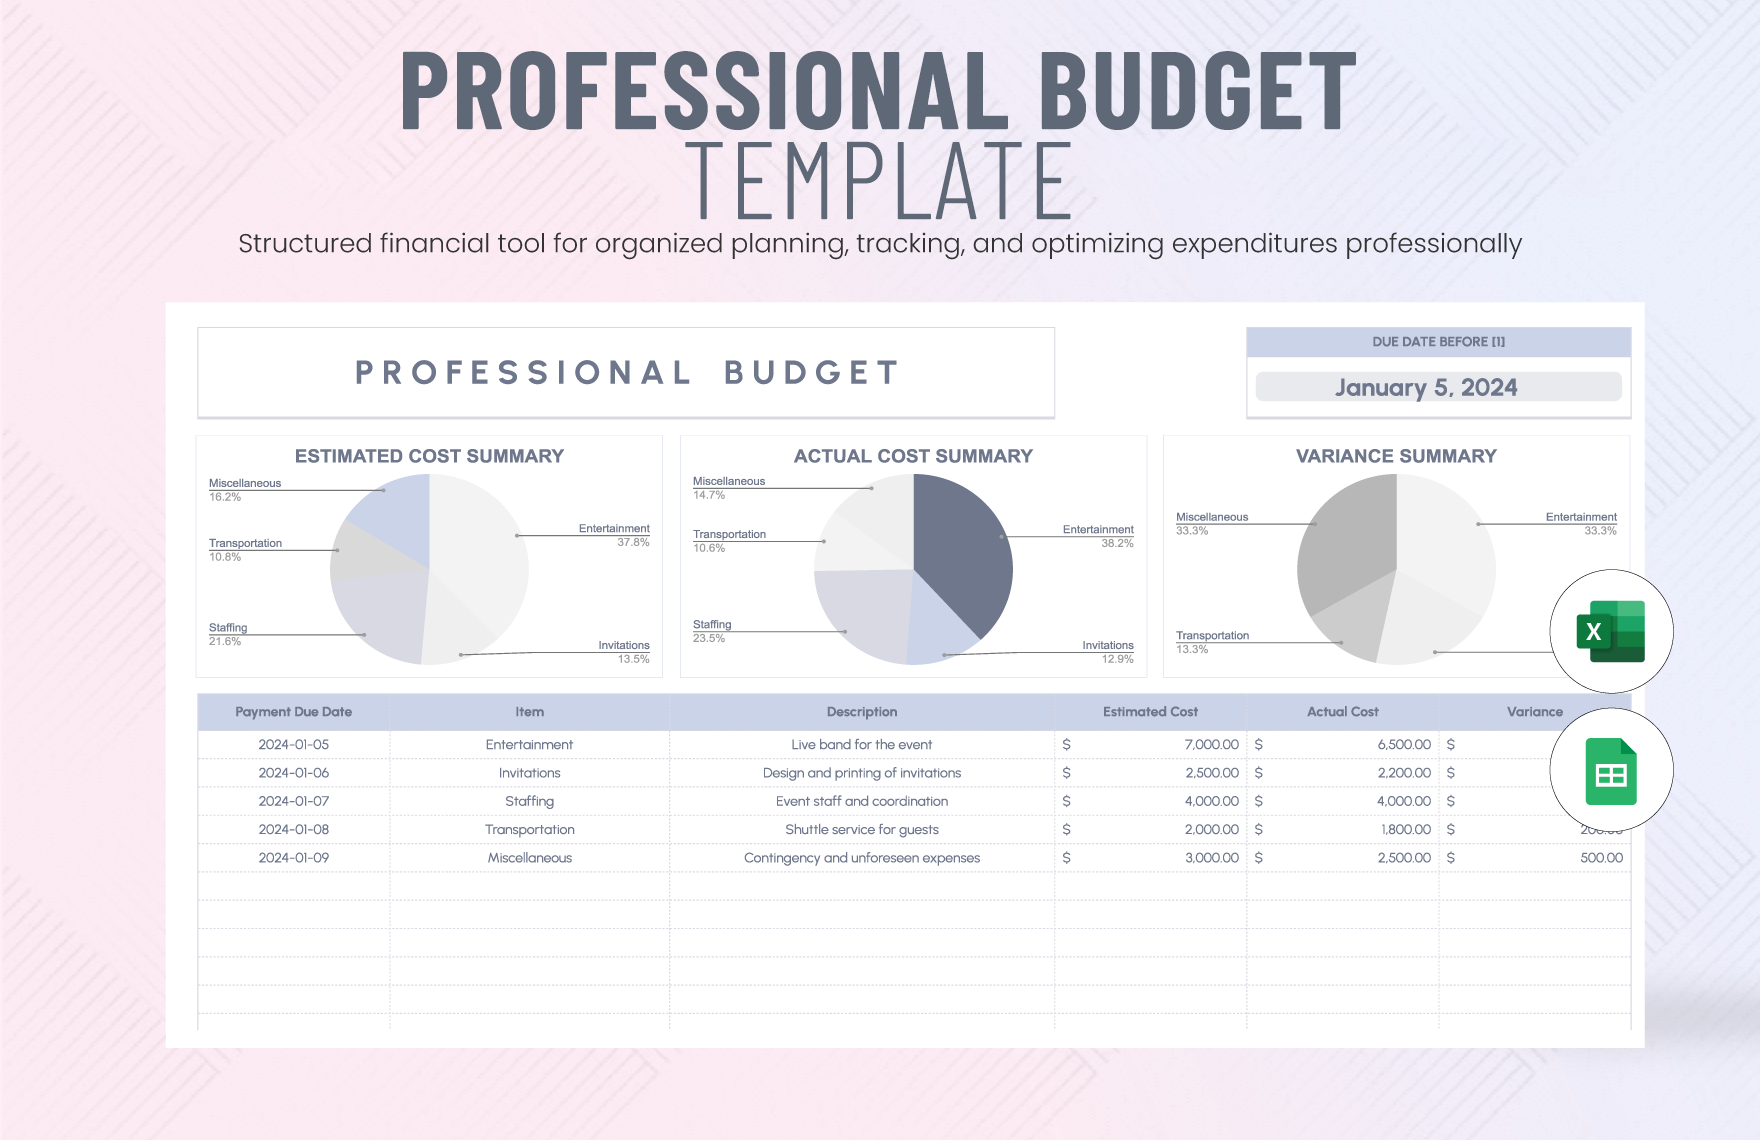 Professional Budget Template in Excel, Google Sheets